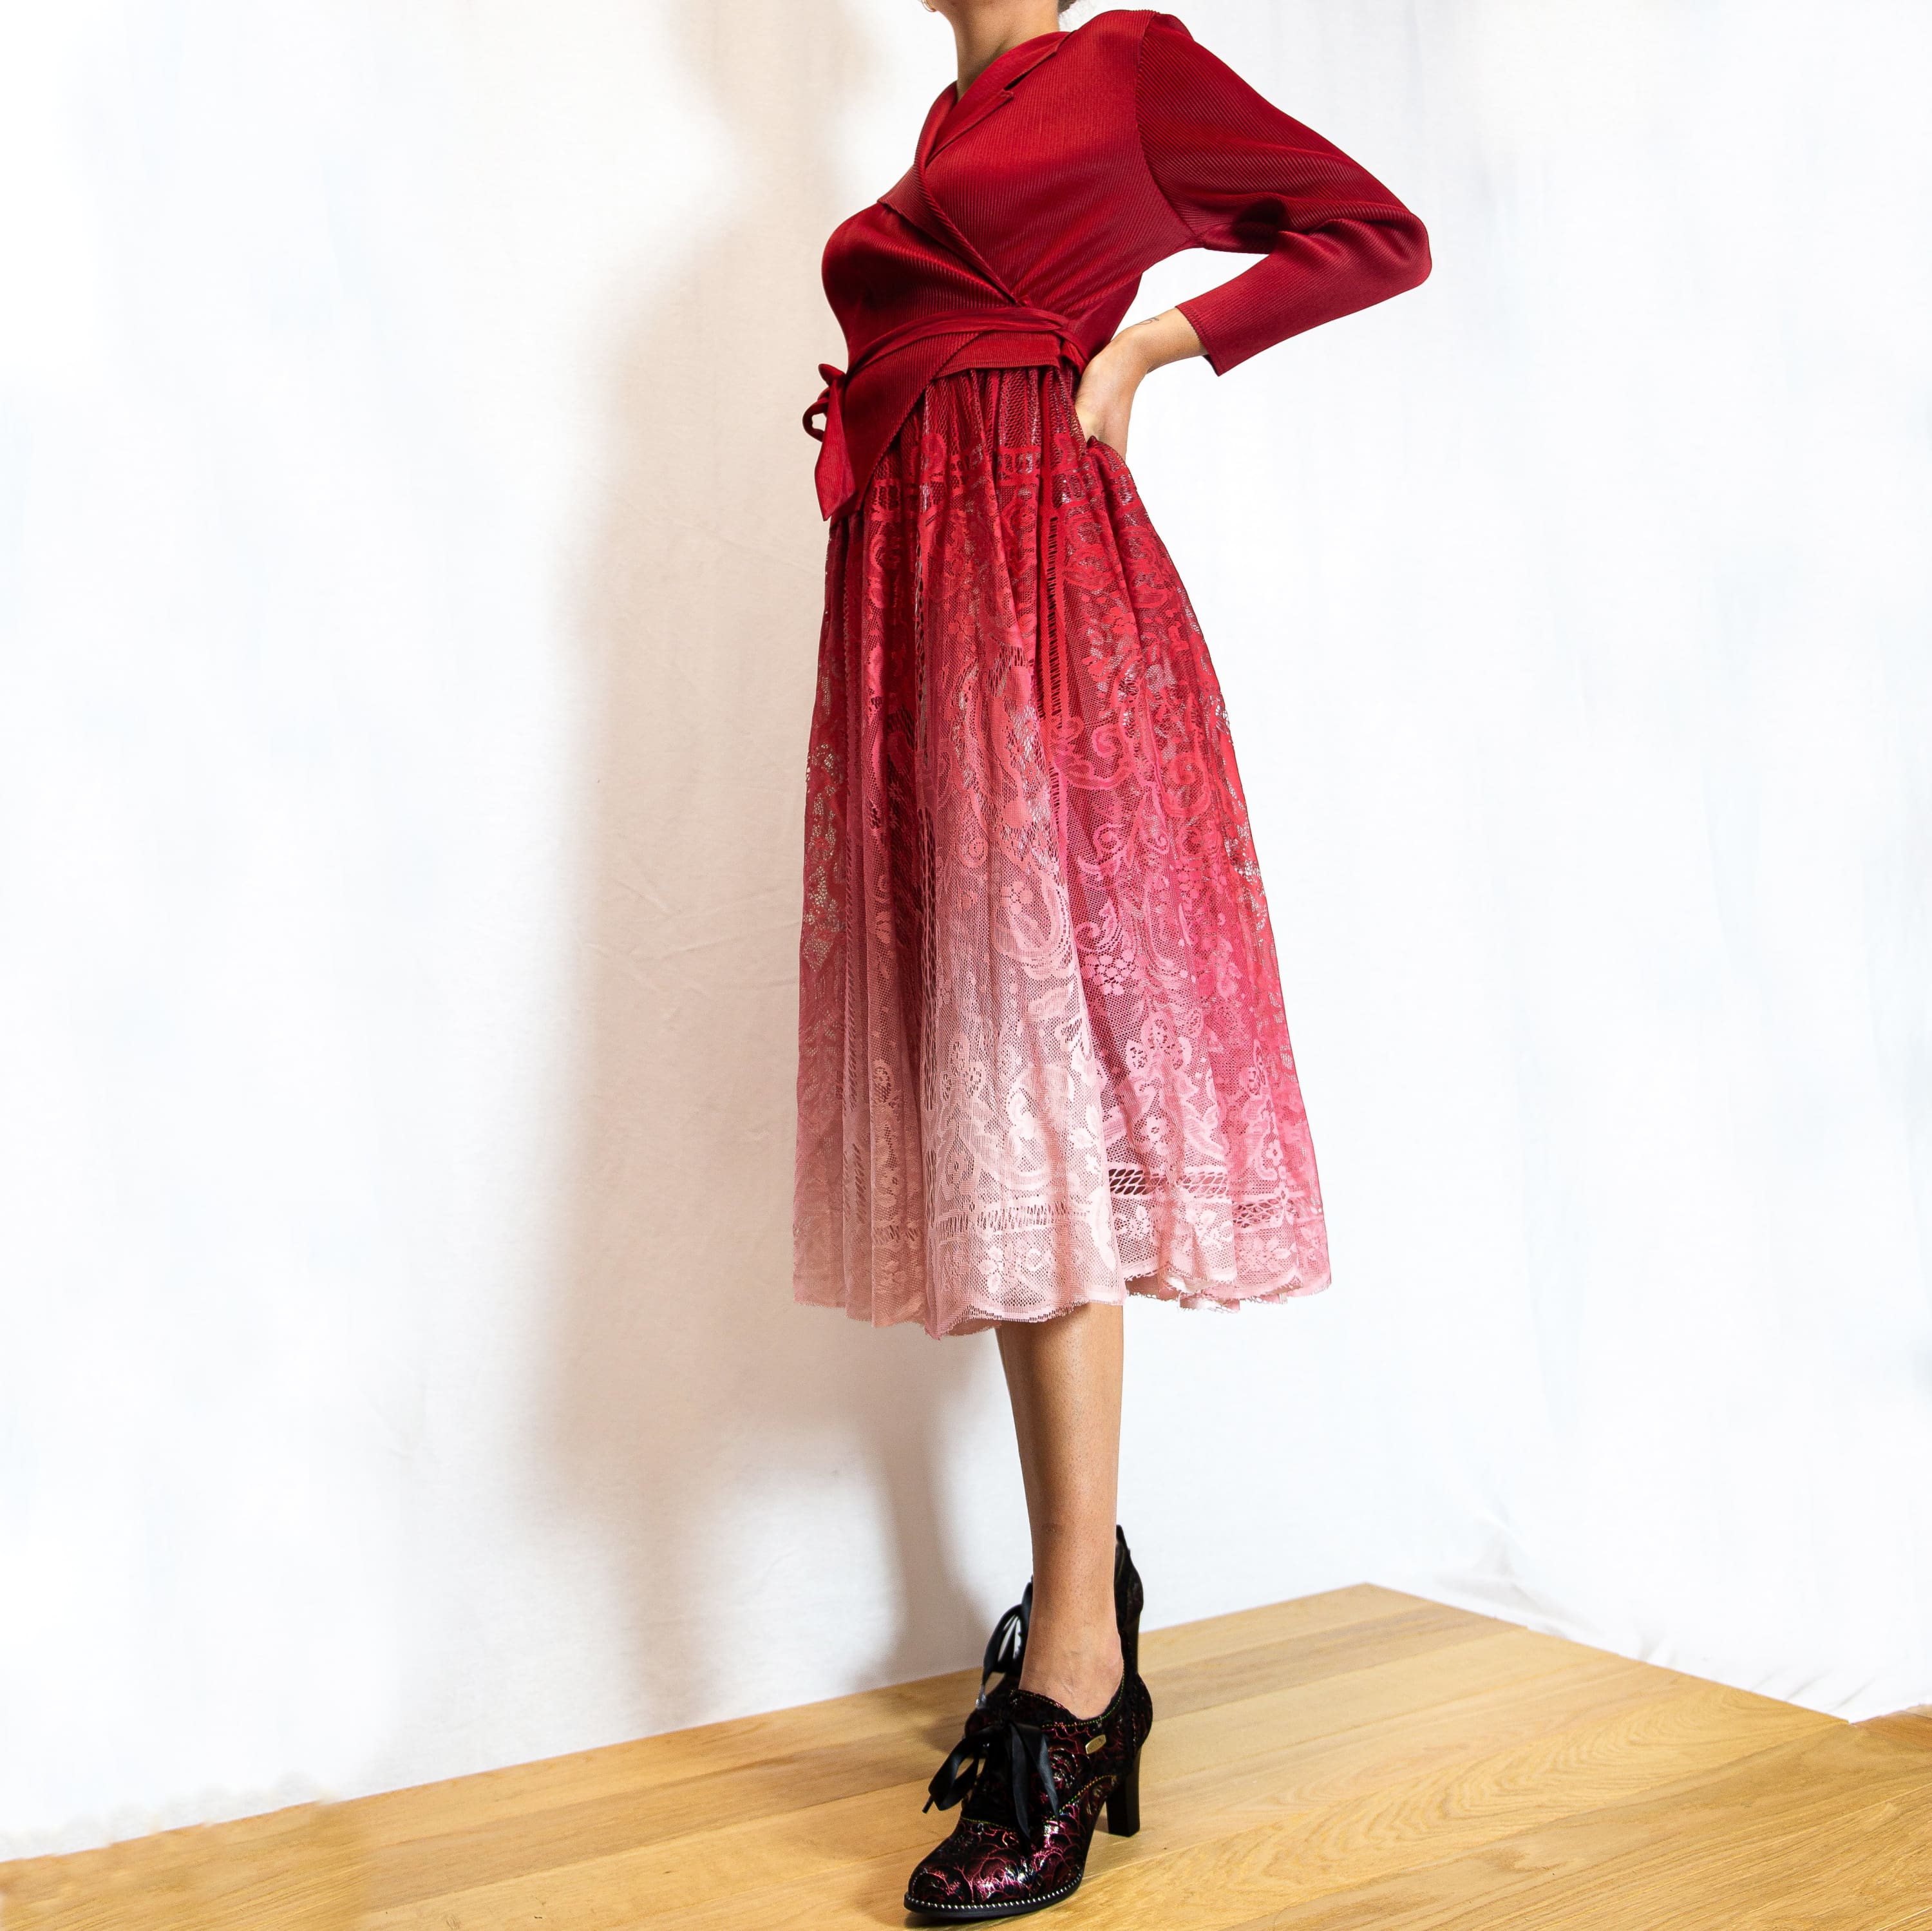 Dundee Dress Red gradient Exclusive - Dresses